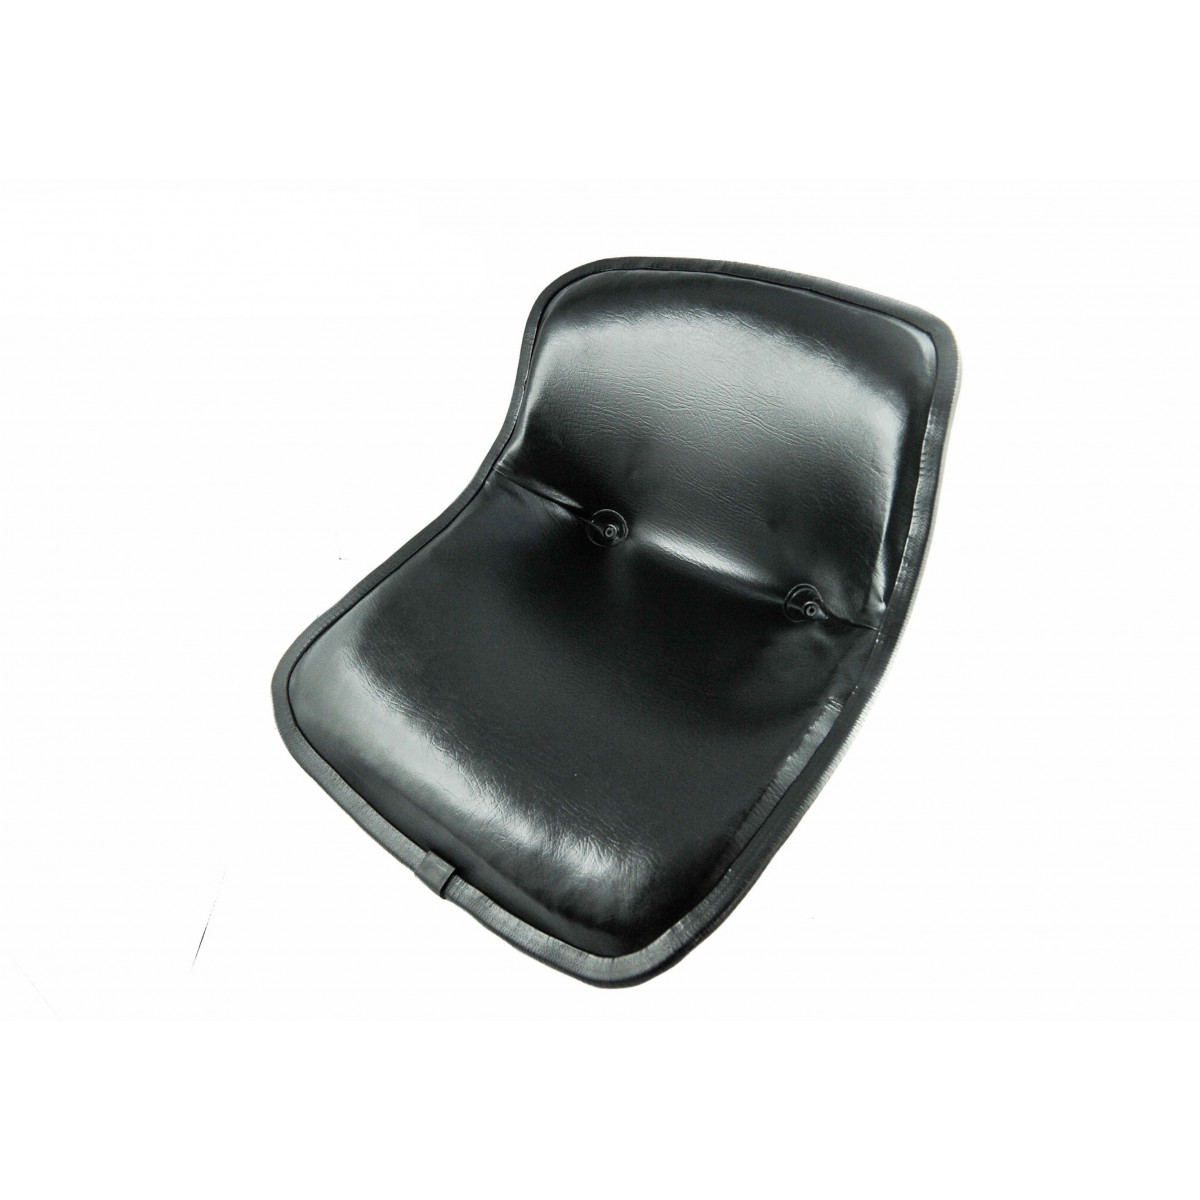 The universal seat for the tractor YY7 tractor